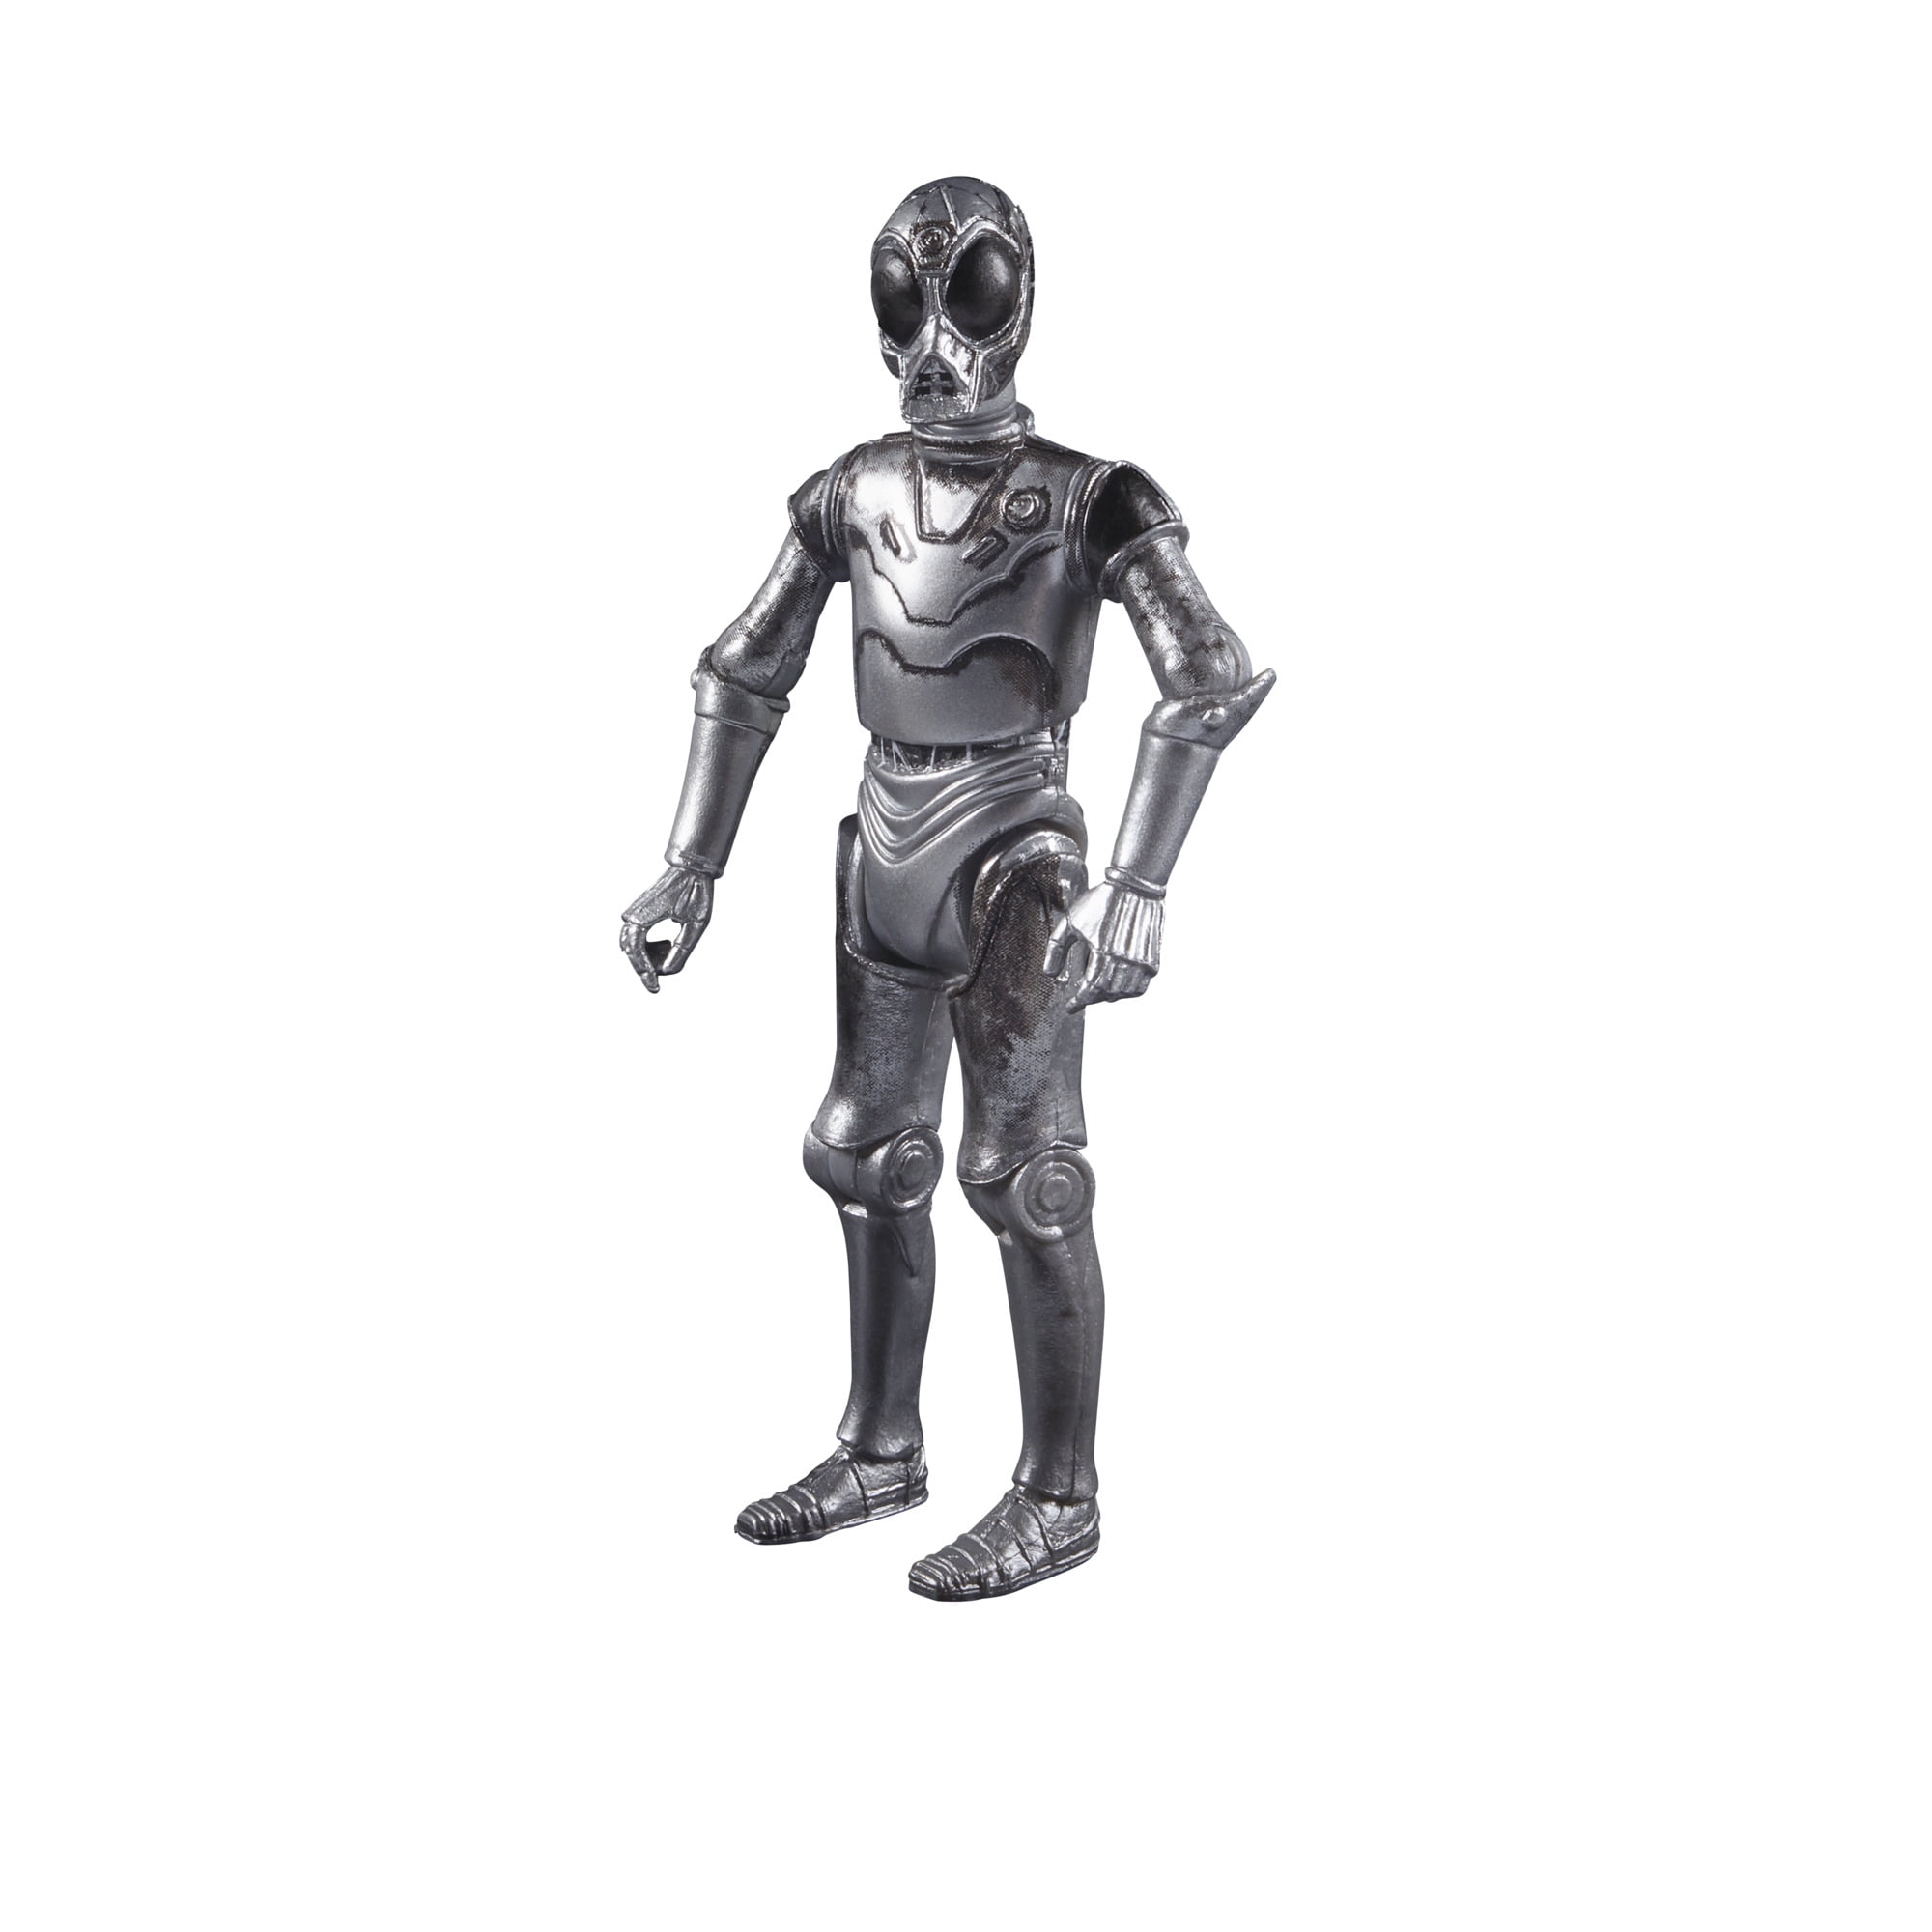 Toys for Kids Ages 4 and Up Star Wars The Vintage Collection Power Droid Toy 3.75-Inch-Scale A New Hope Action Figure